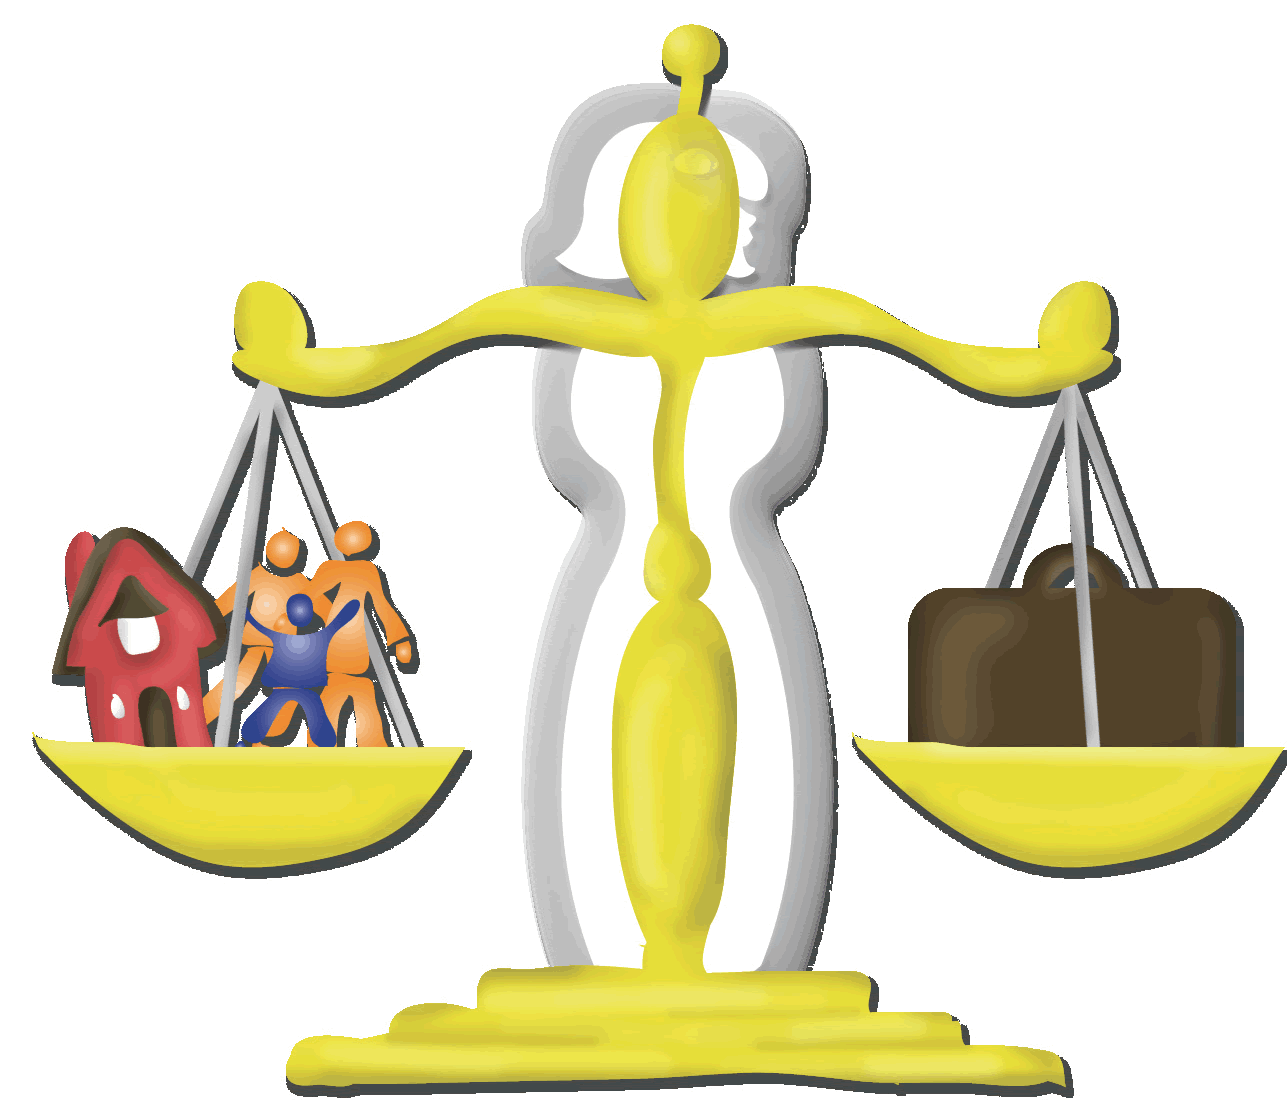 Legal clipart law paper. Terminology image of scales